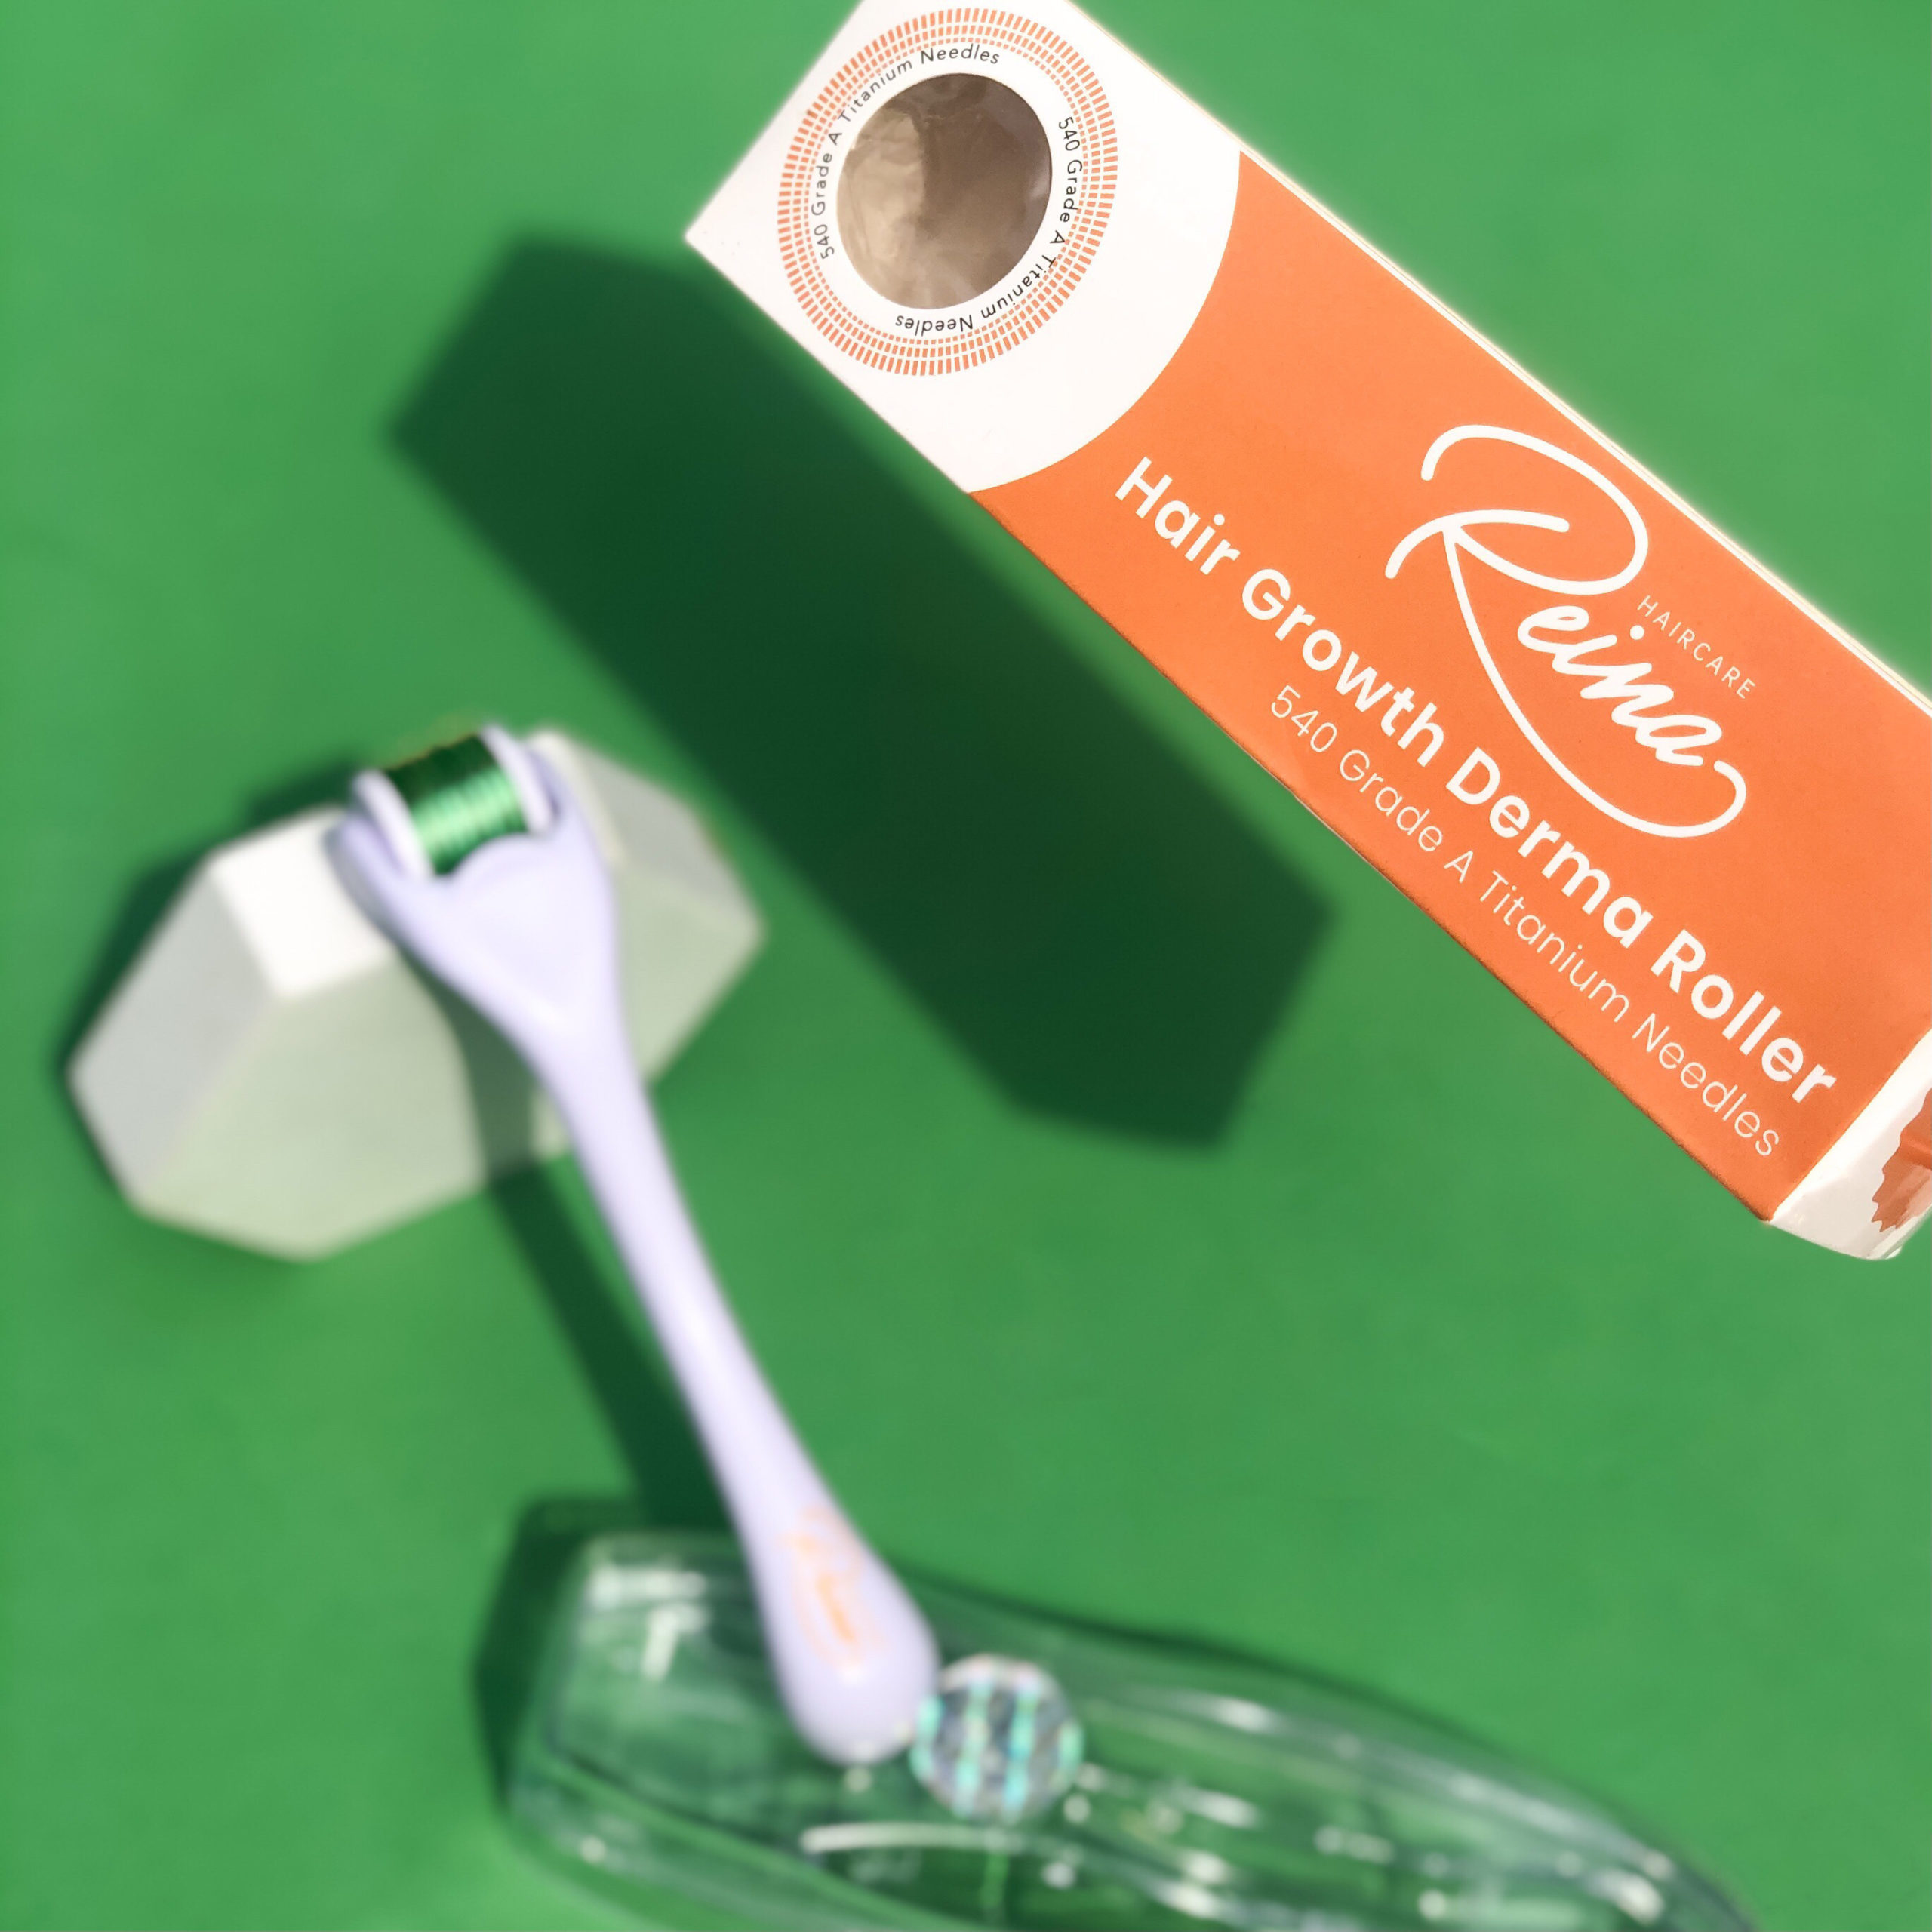 🌟DERMA ROLLER : SOLUTION REPOUSSE CAPILLAIRE OPTIMALE ! 